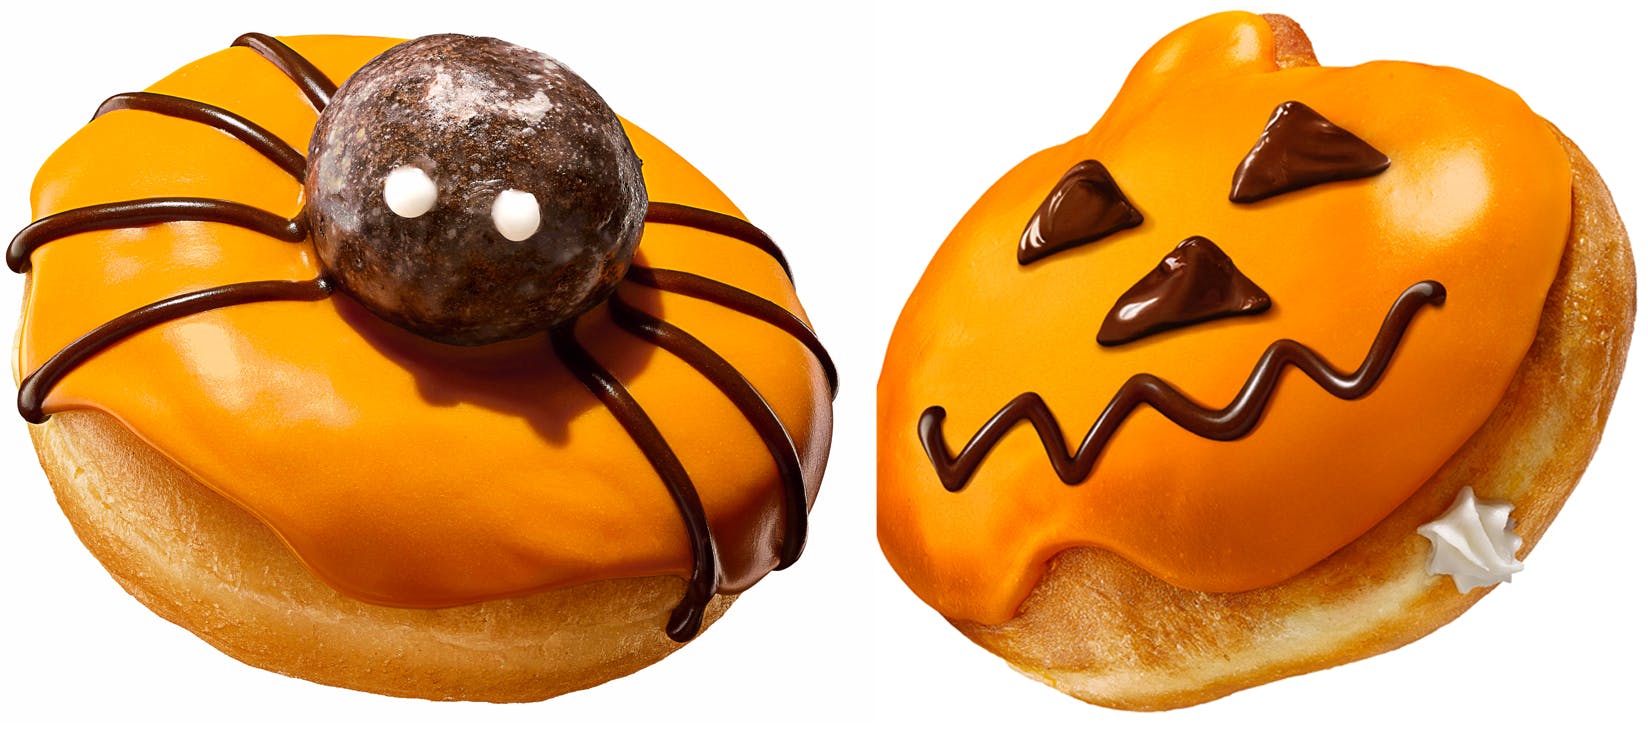 Here's What's on the LimitedTime Dunkin Donuts Halloween Menu The